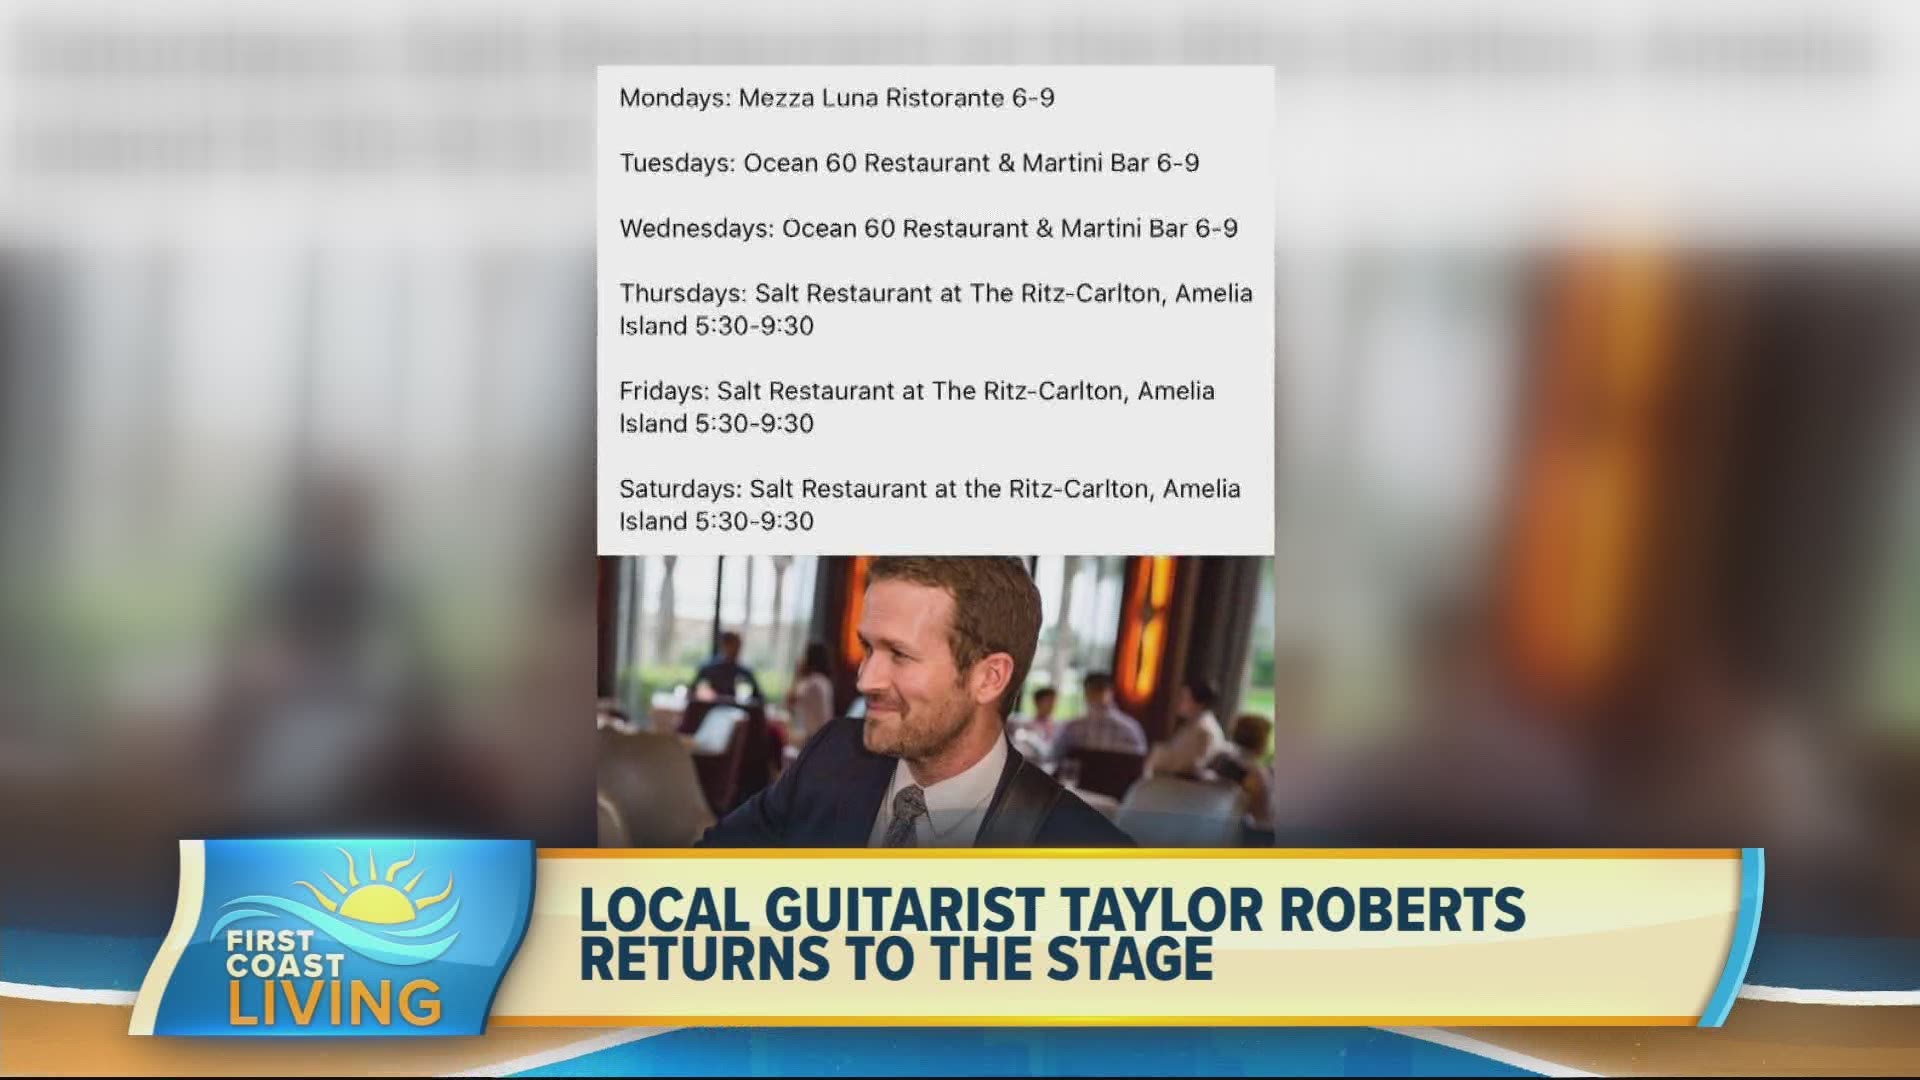 Local guitarist Taylor Roberts is back on the musical scene